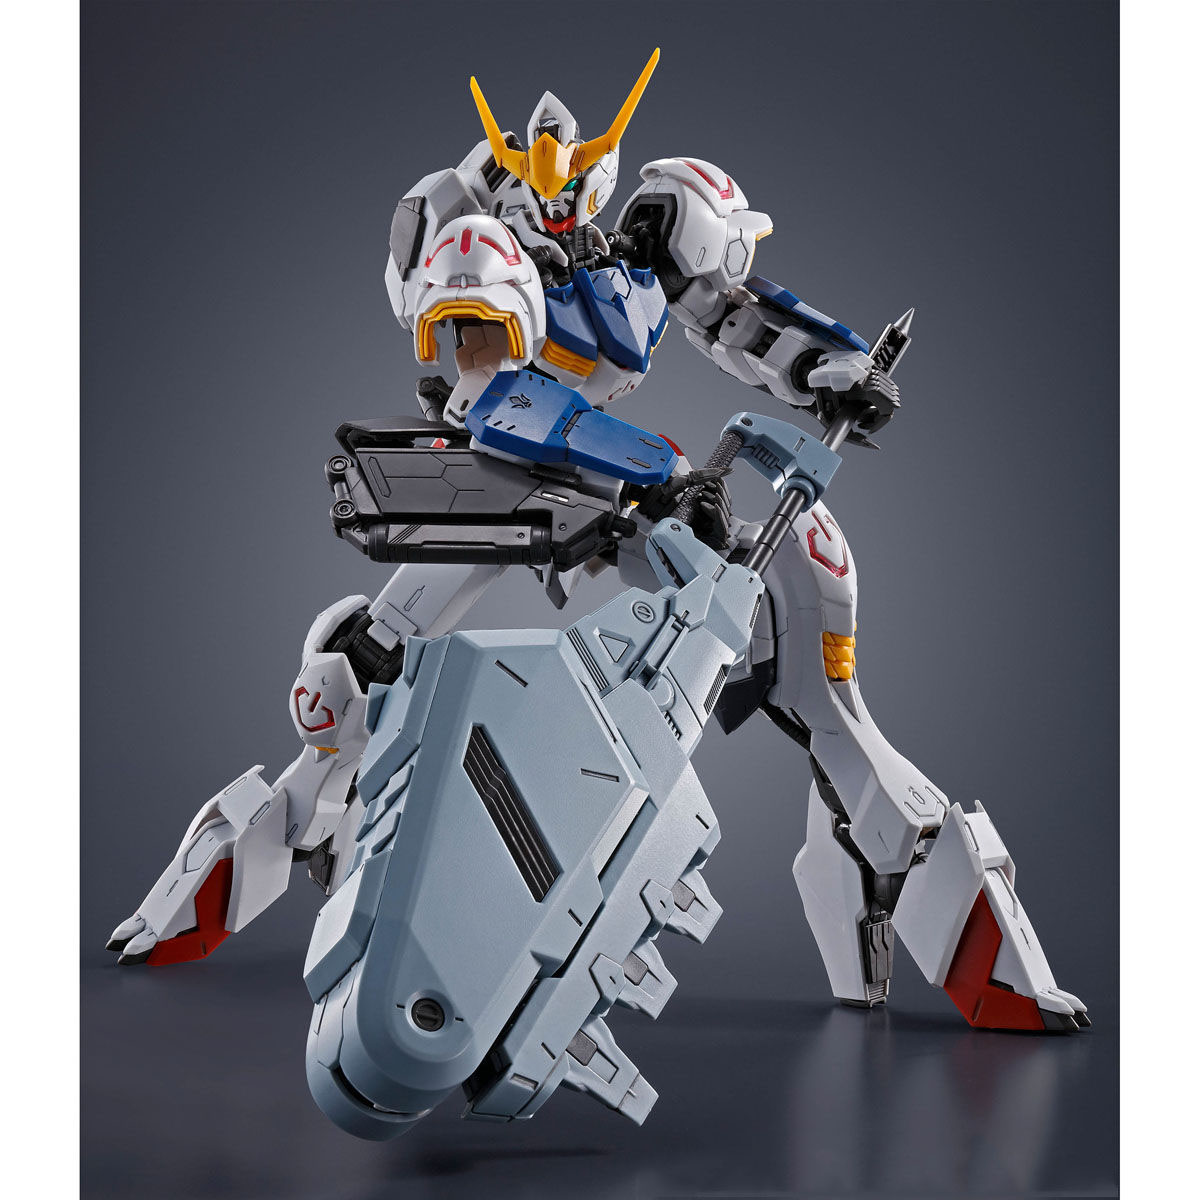 Mg 1 100 Expansion Parts Set For Gundam Barbatos Dec 2020 Delivery Gundam Premium Bandai Usa Online Store For Action Figures Model Kits Toys And More